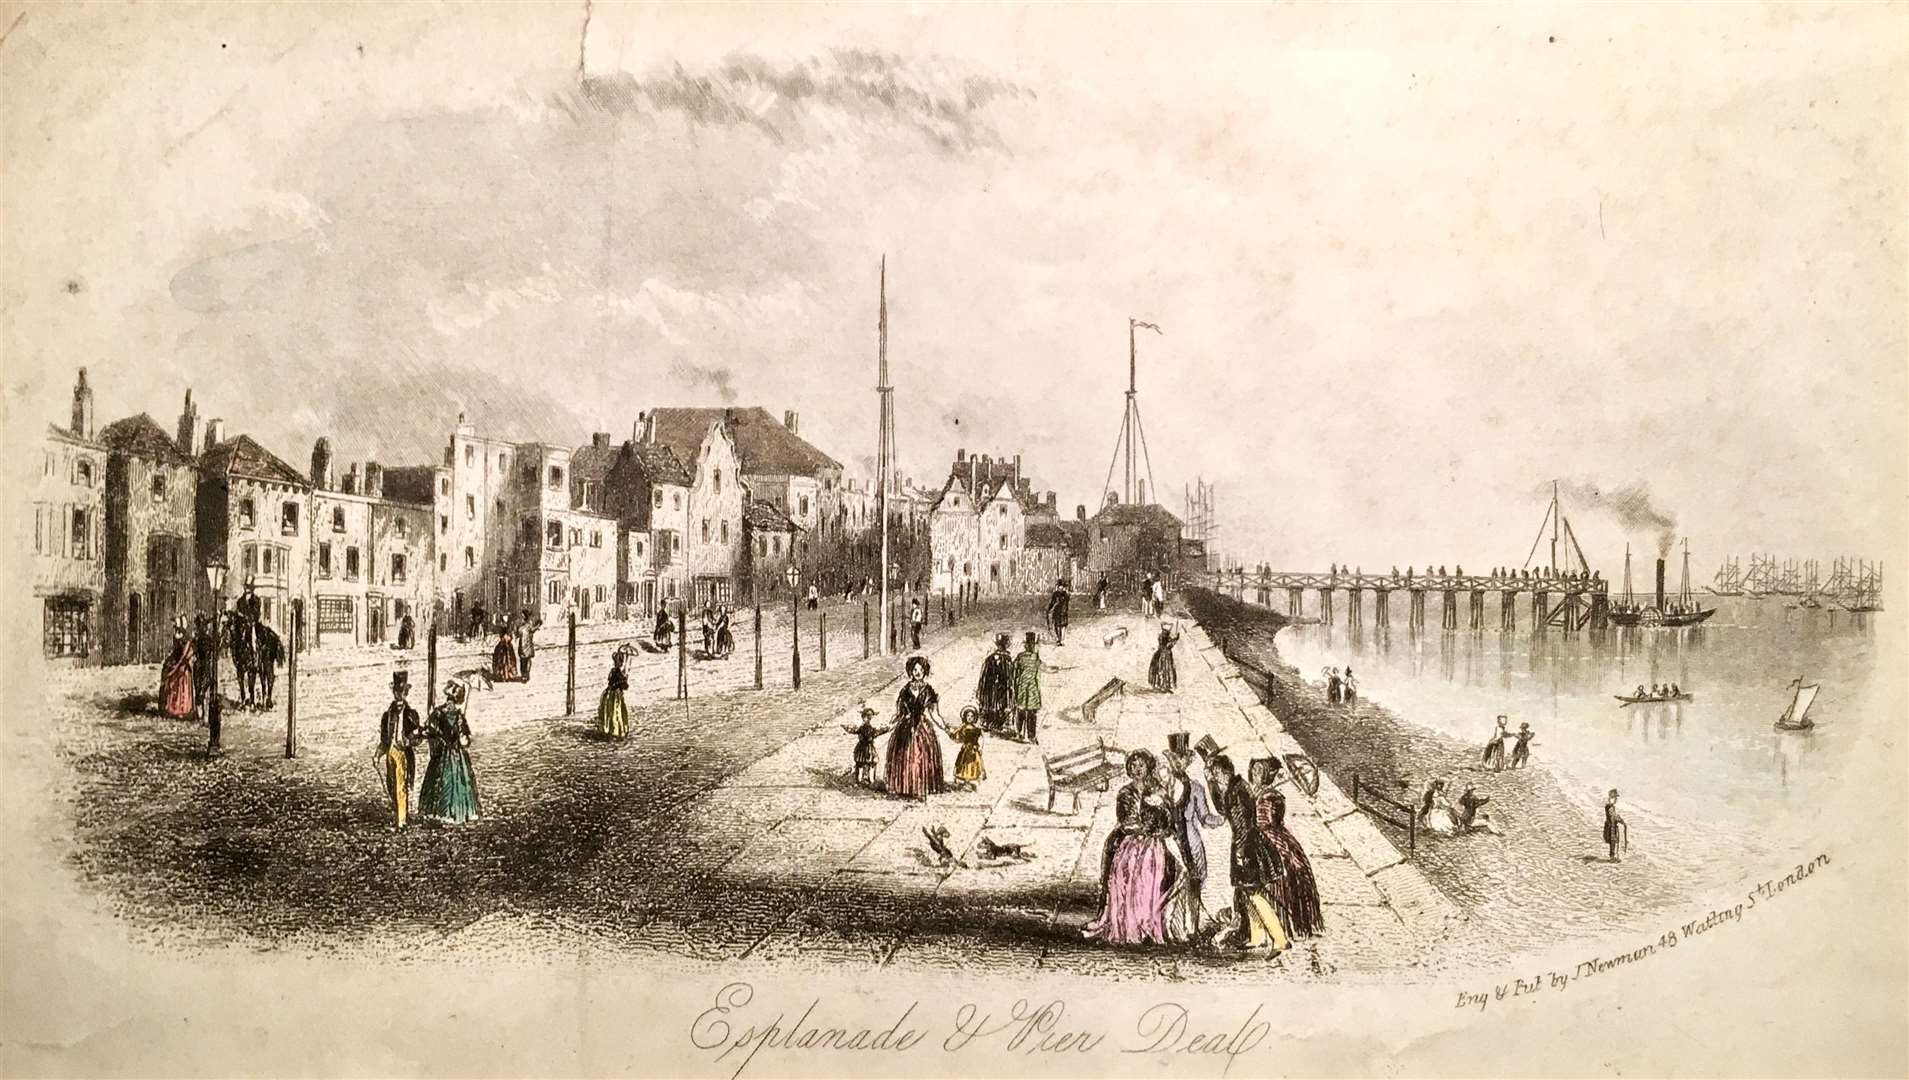 A mid-1800s print looking northward along the Pier Parade